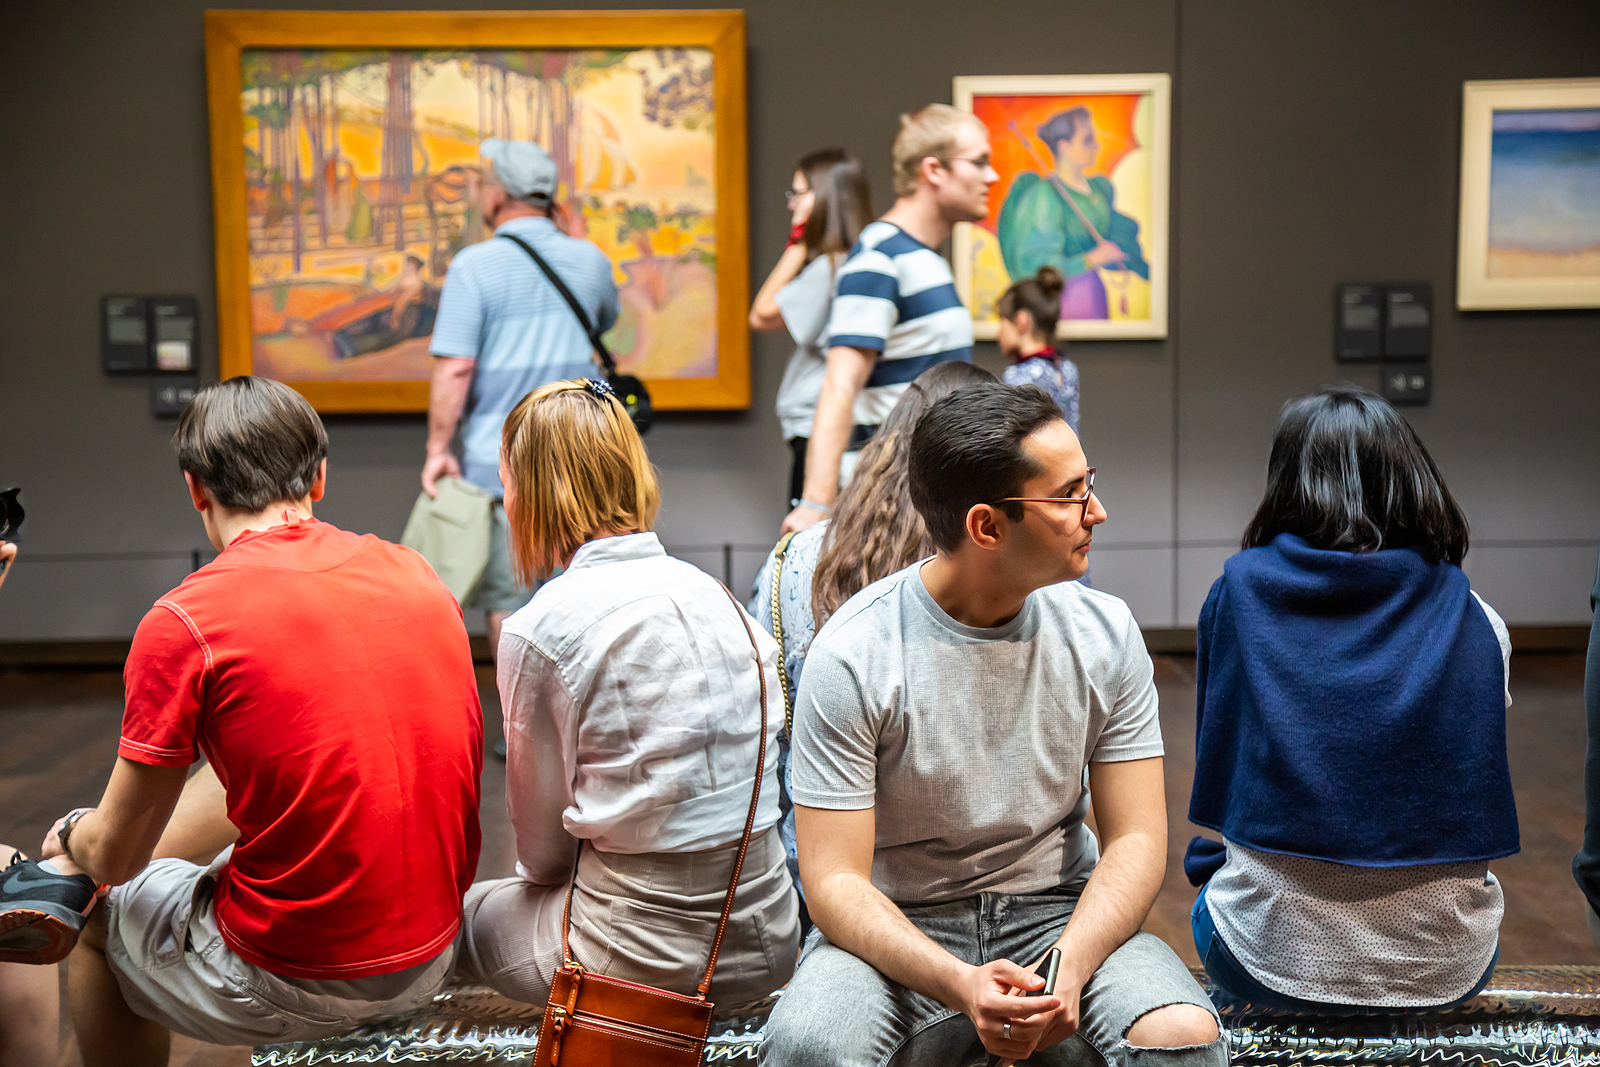 Top 5 Reasons Why You Should Visit a Museum Exhibit